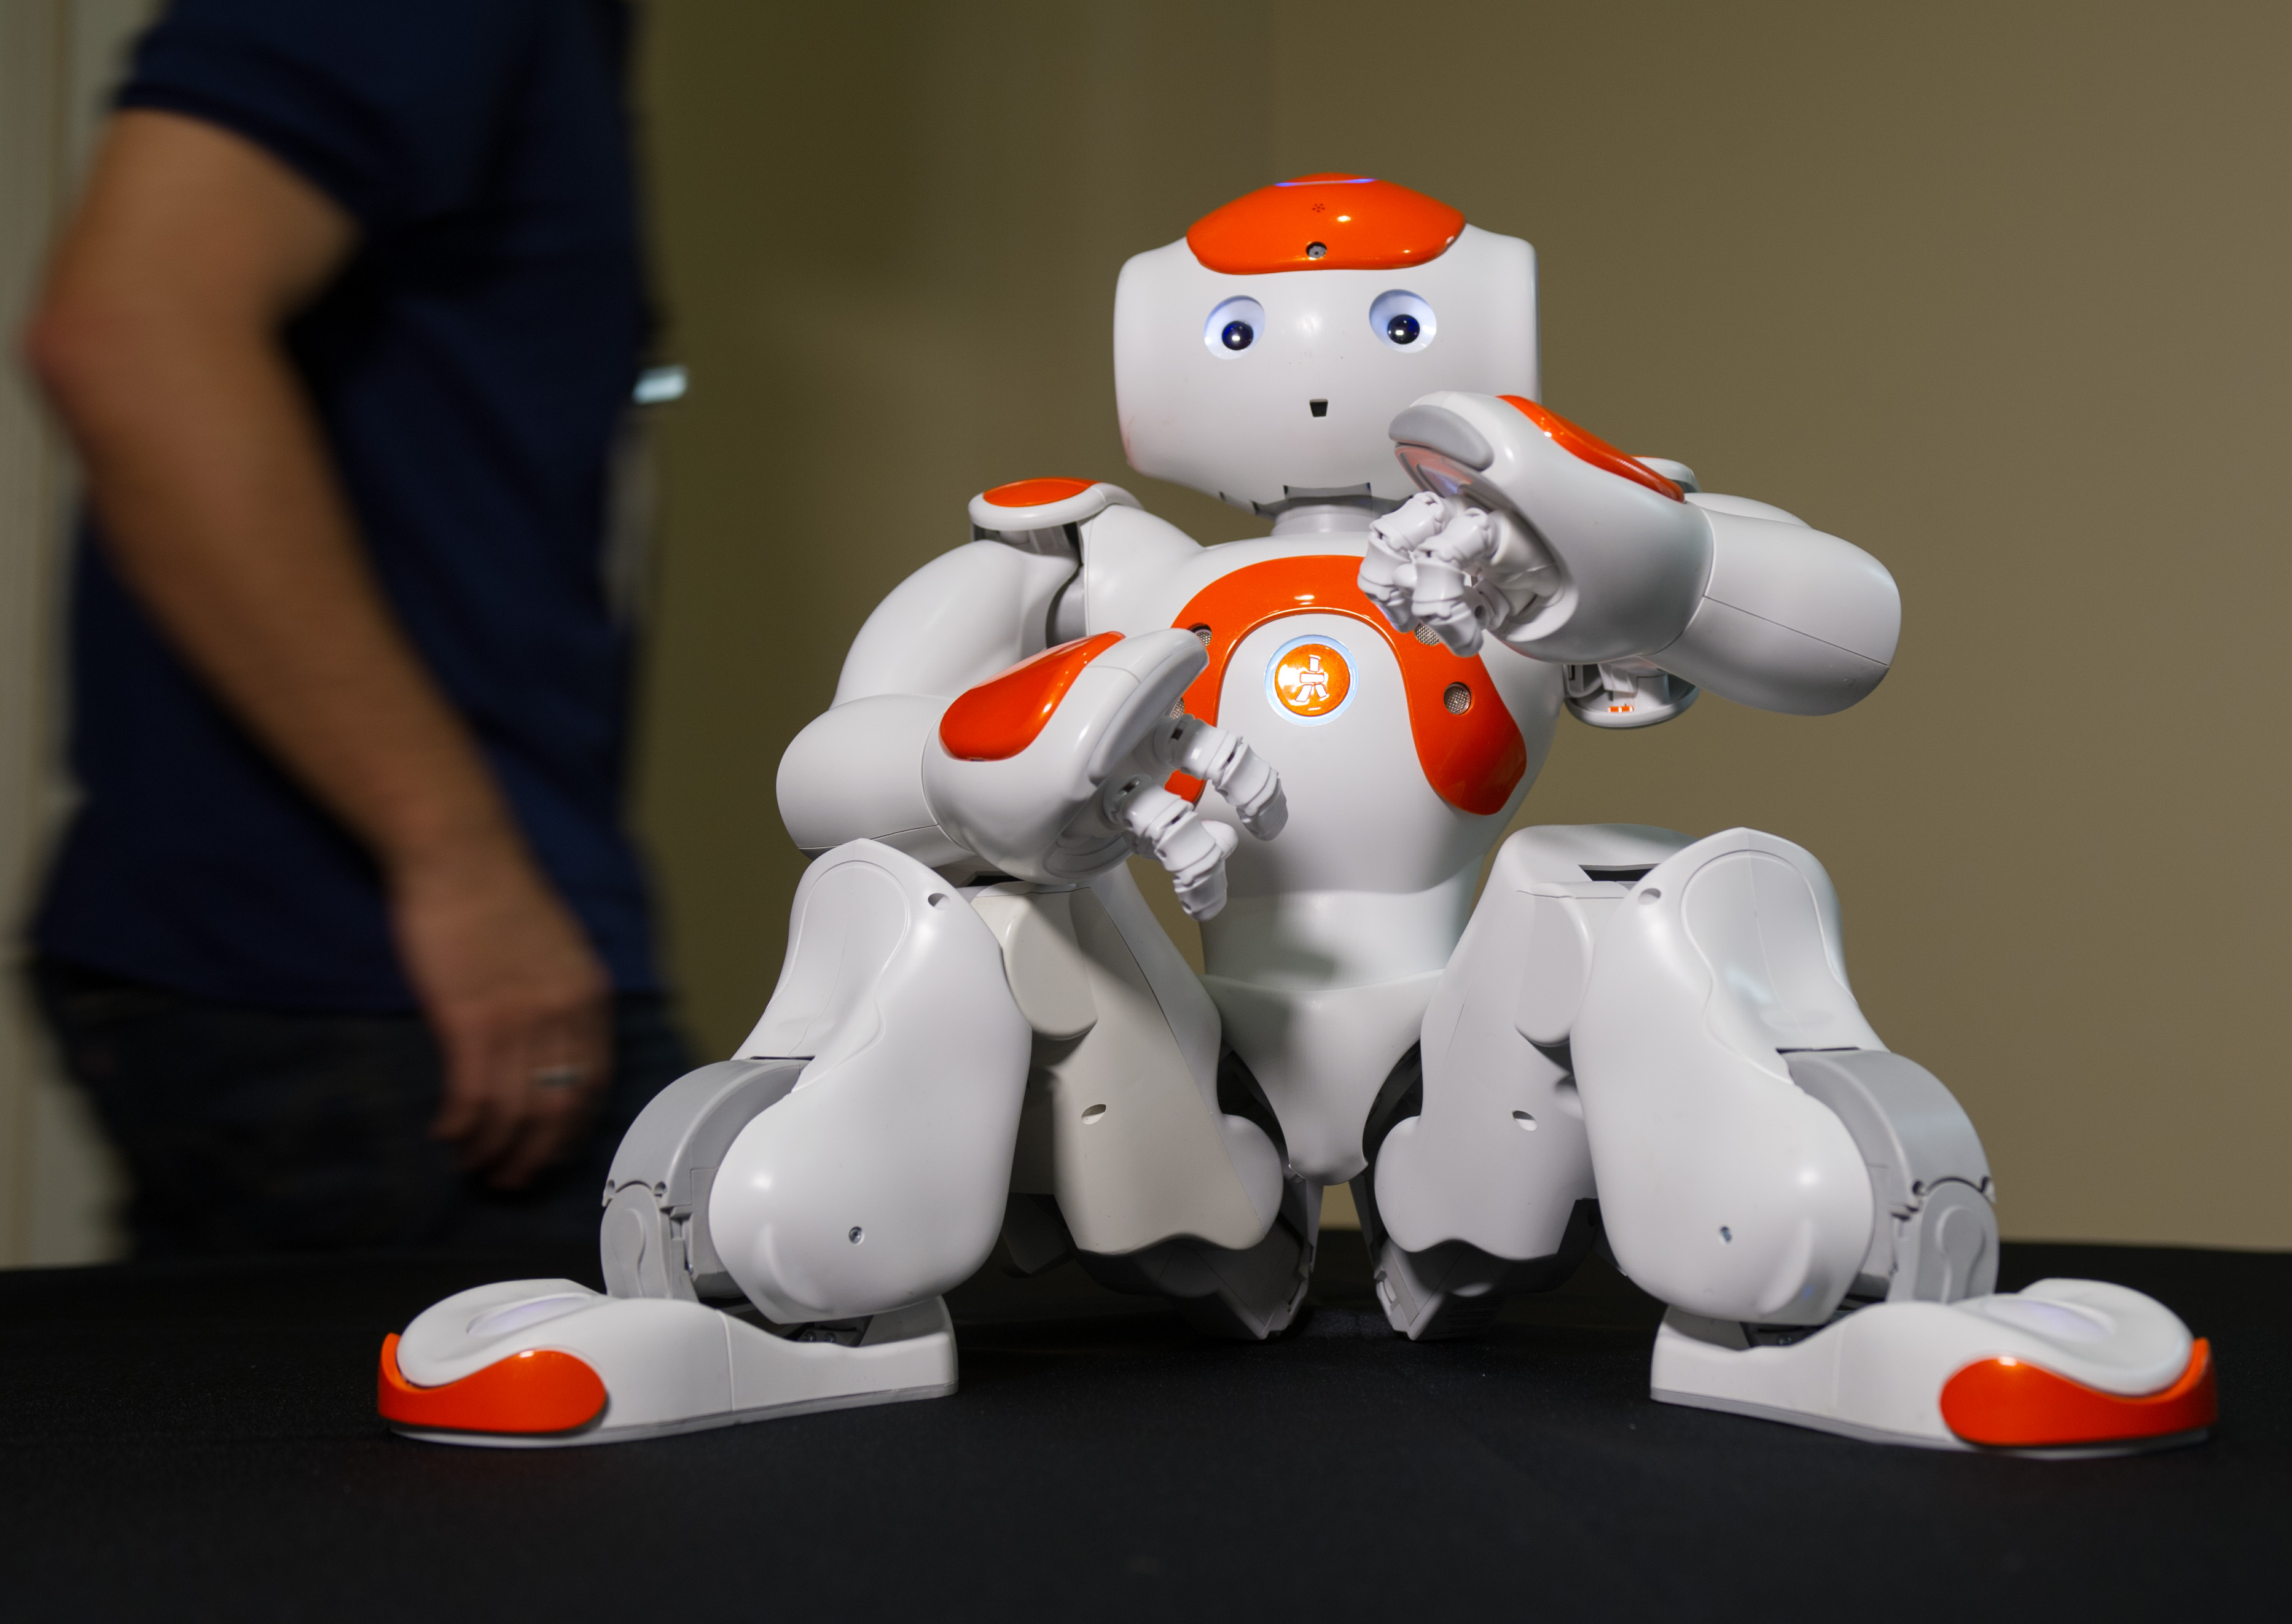 NAO is a progammable humanoid with 25 degrees of freedom. It can dance, talk and stand up on its own. It is on display at Georgia Tech during the Humanoids 2013 conference.